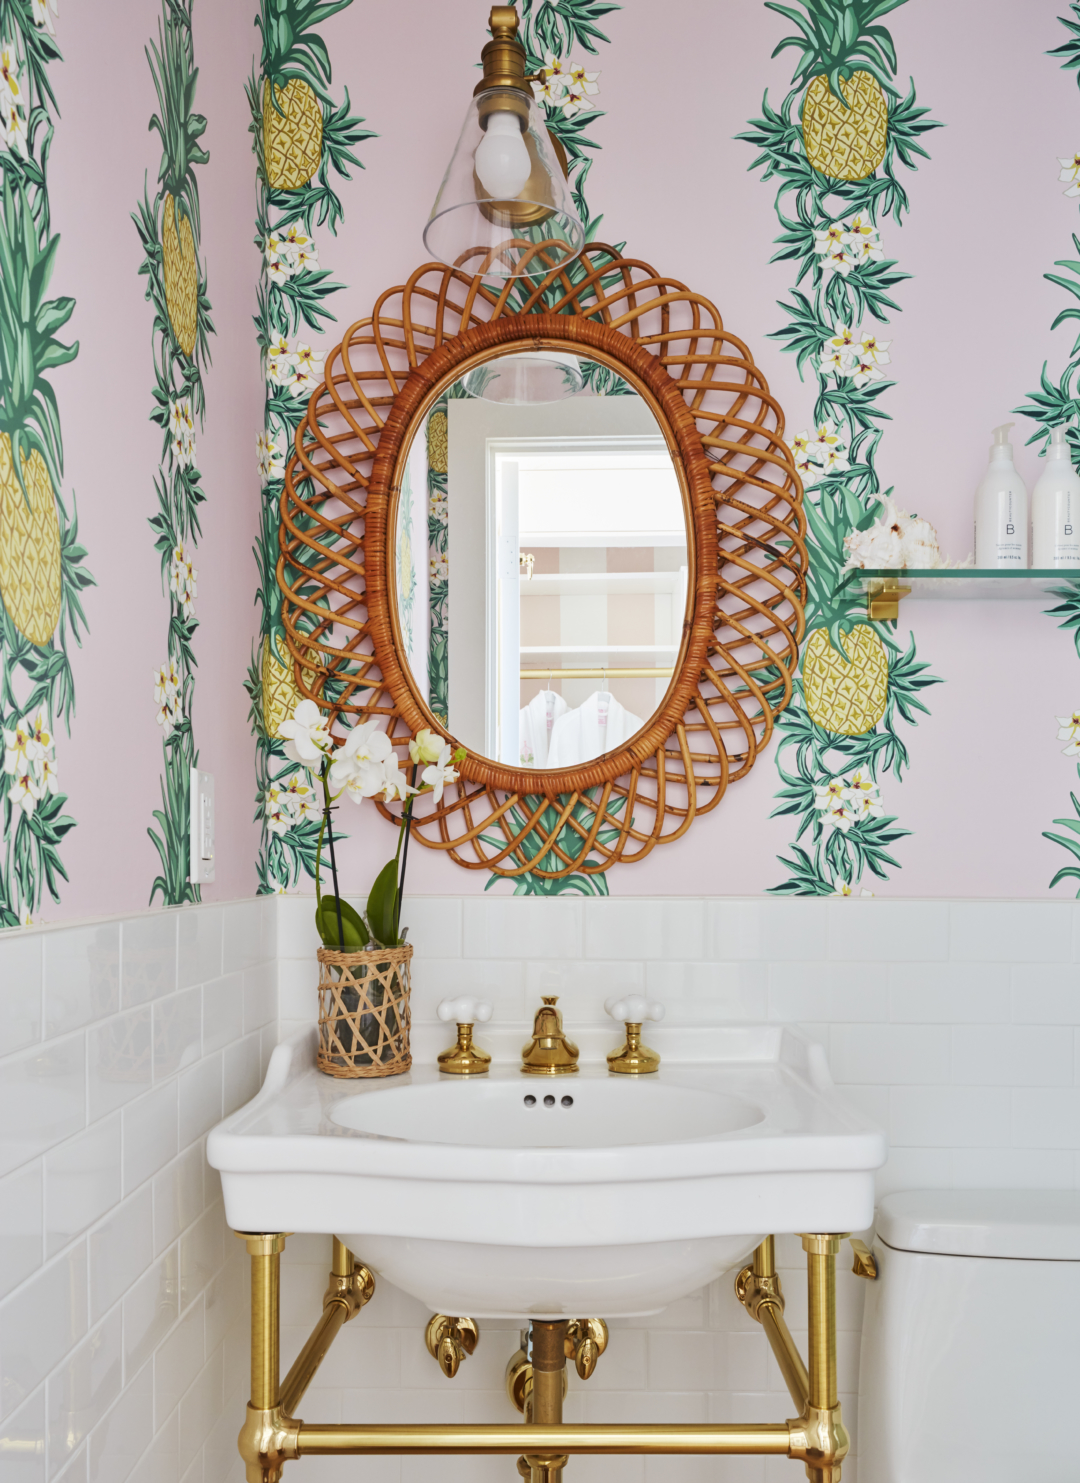 Pineapple and floral pink wallpaper in bathroom